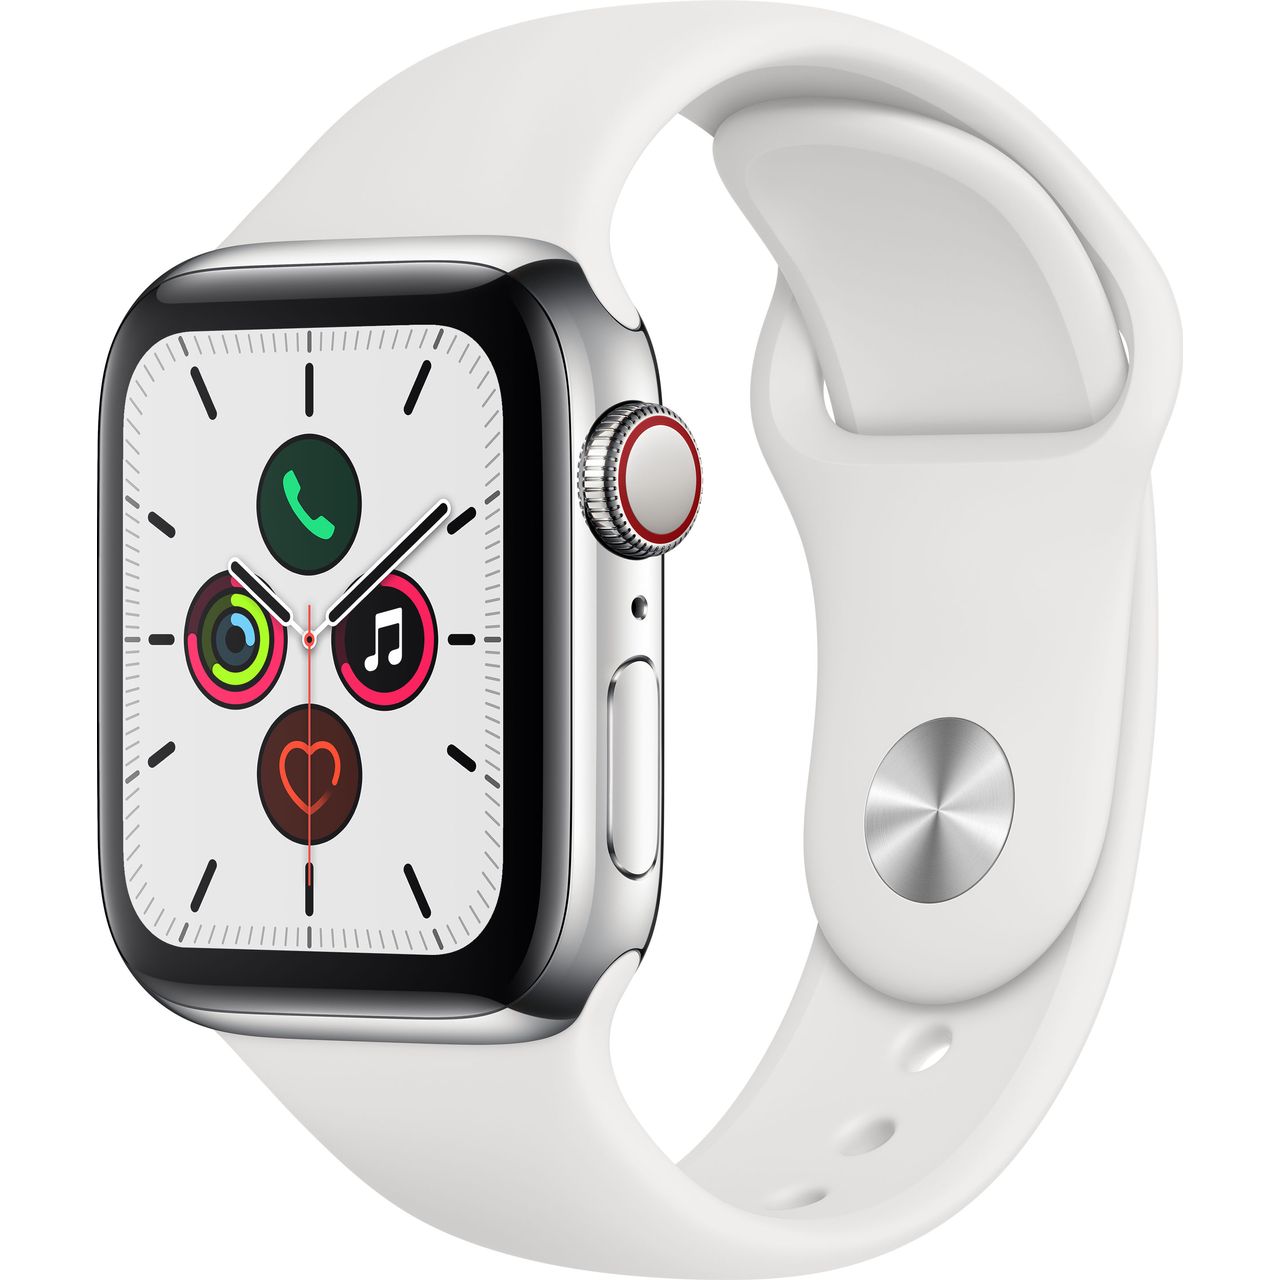 Apple Watch Series 5, 40mm, GPS + Cellular [2019] Review